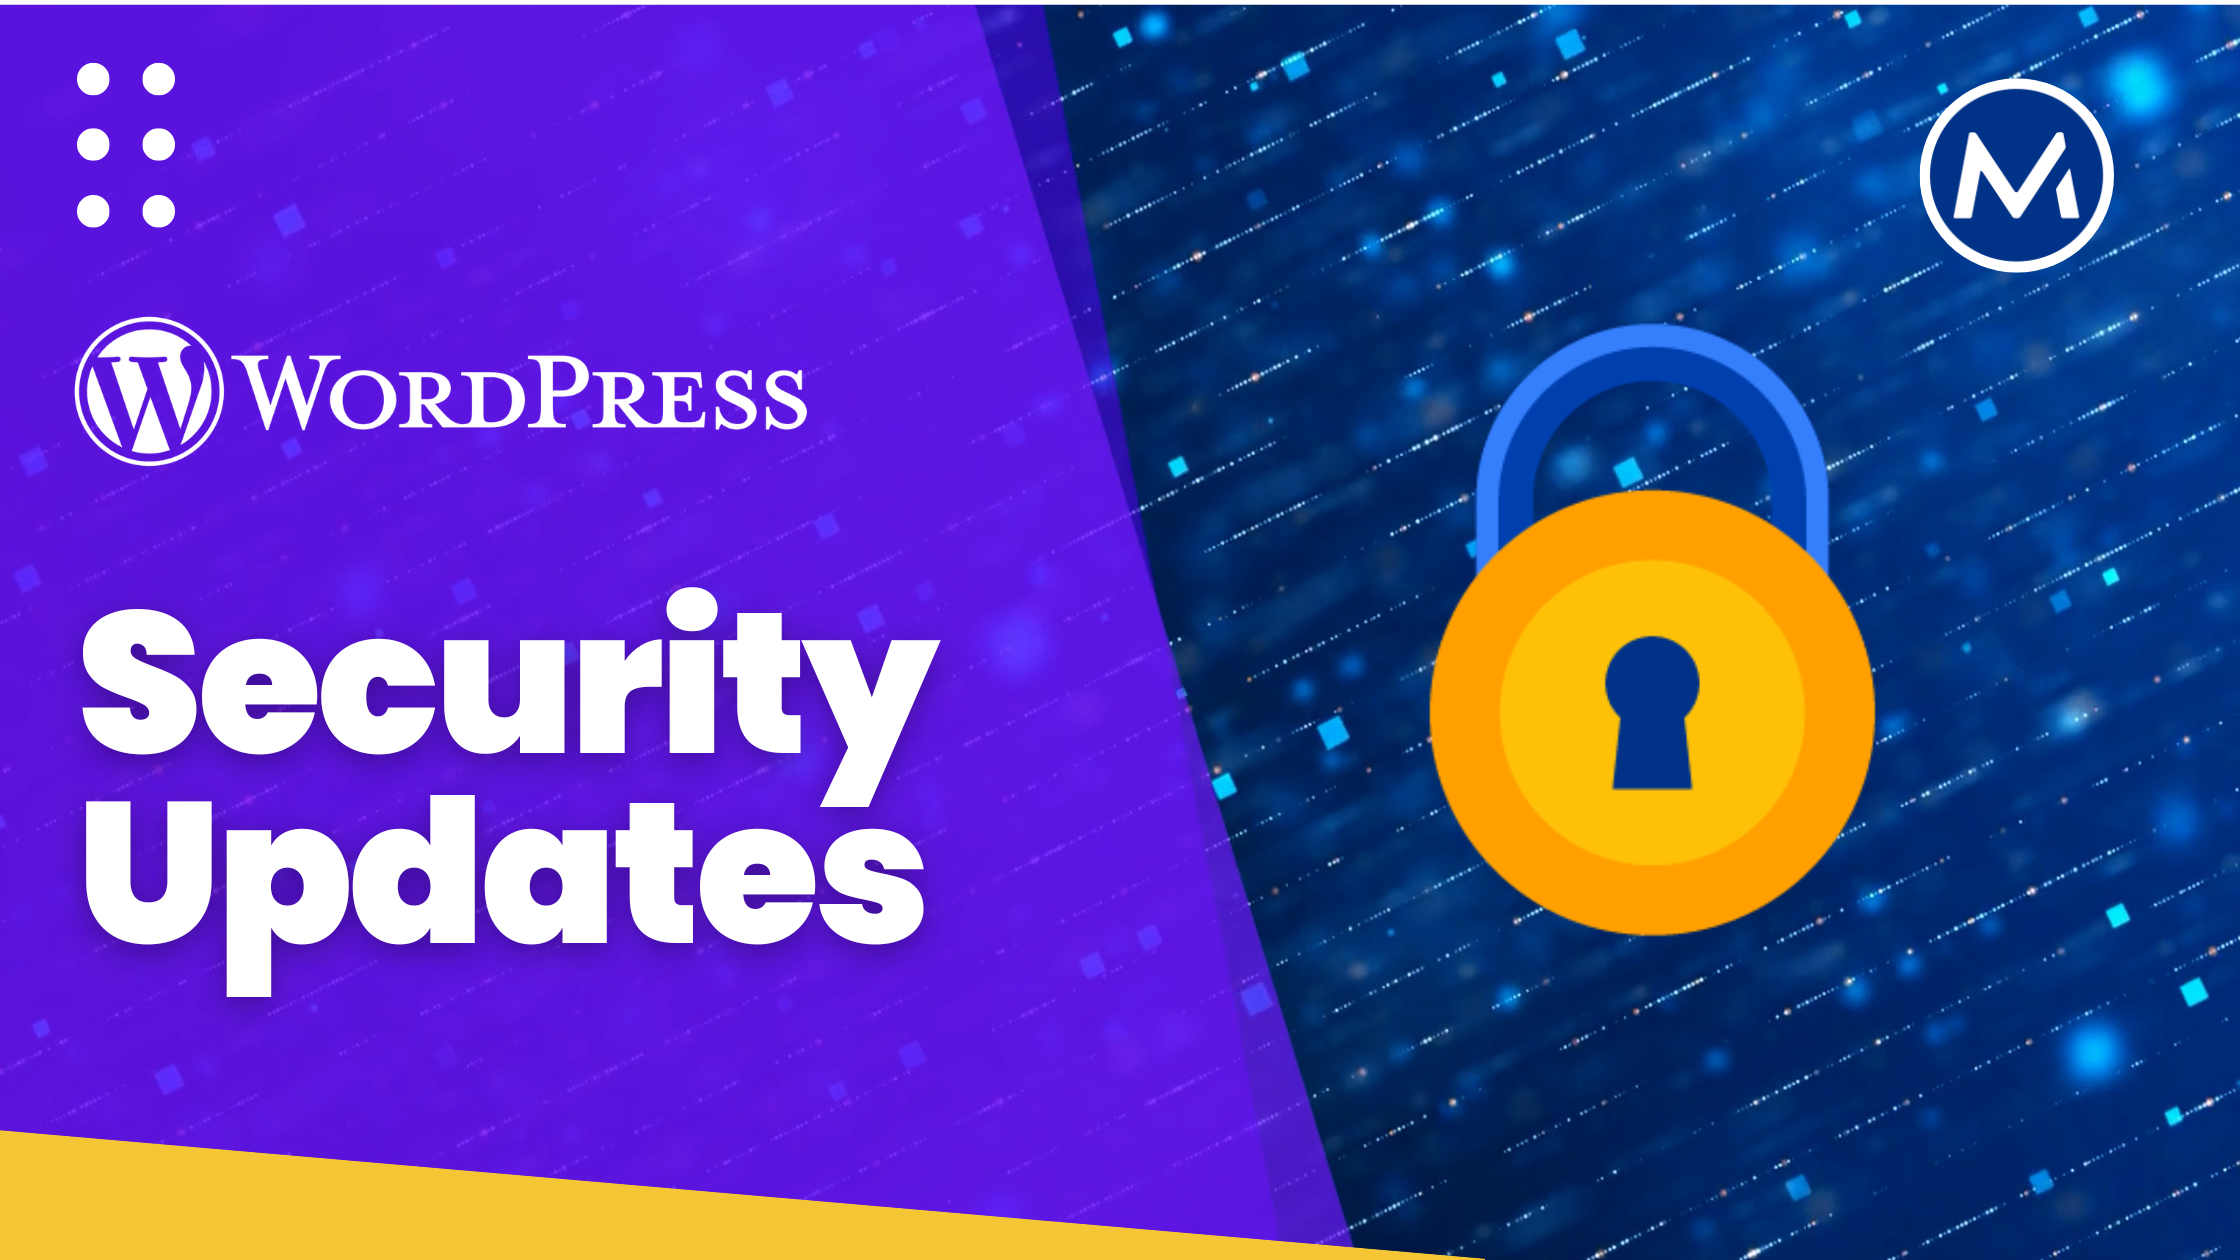 WordPress care plans should include security updates